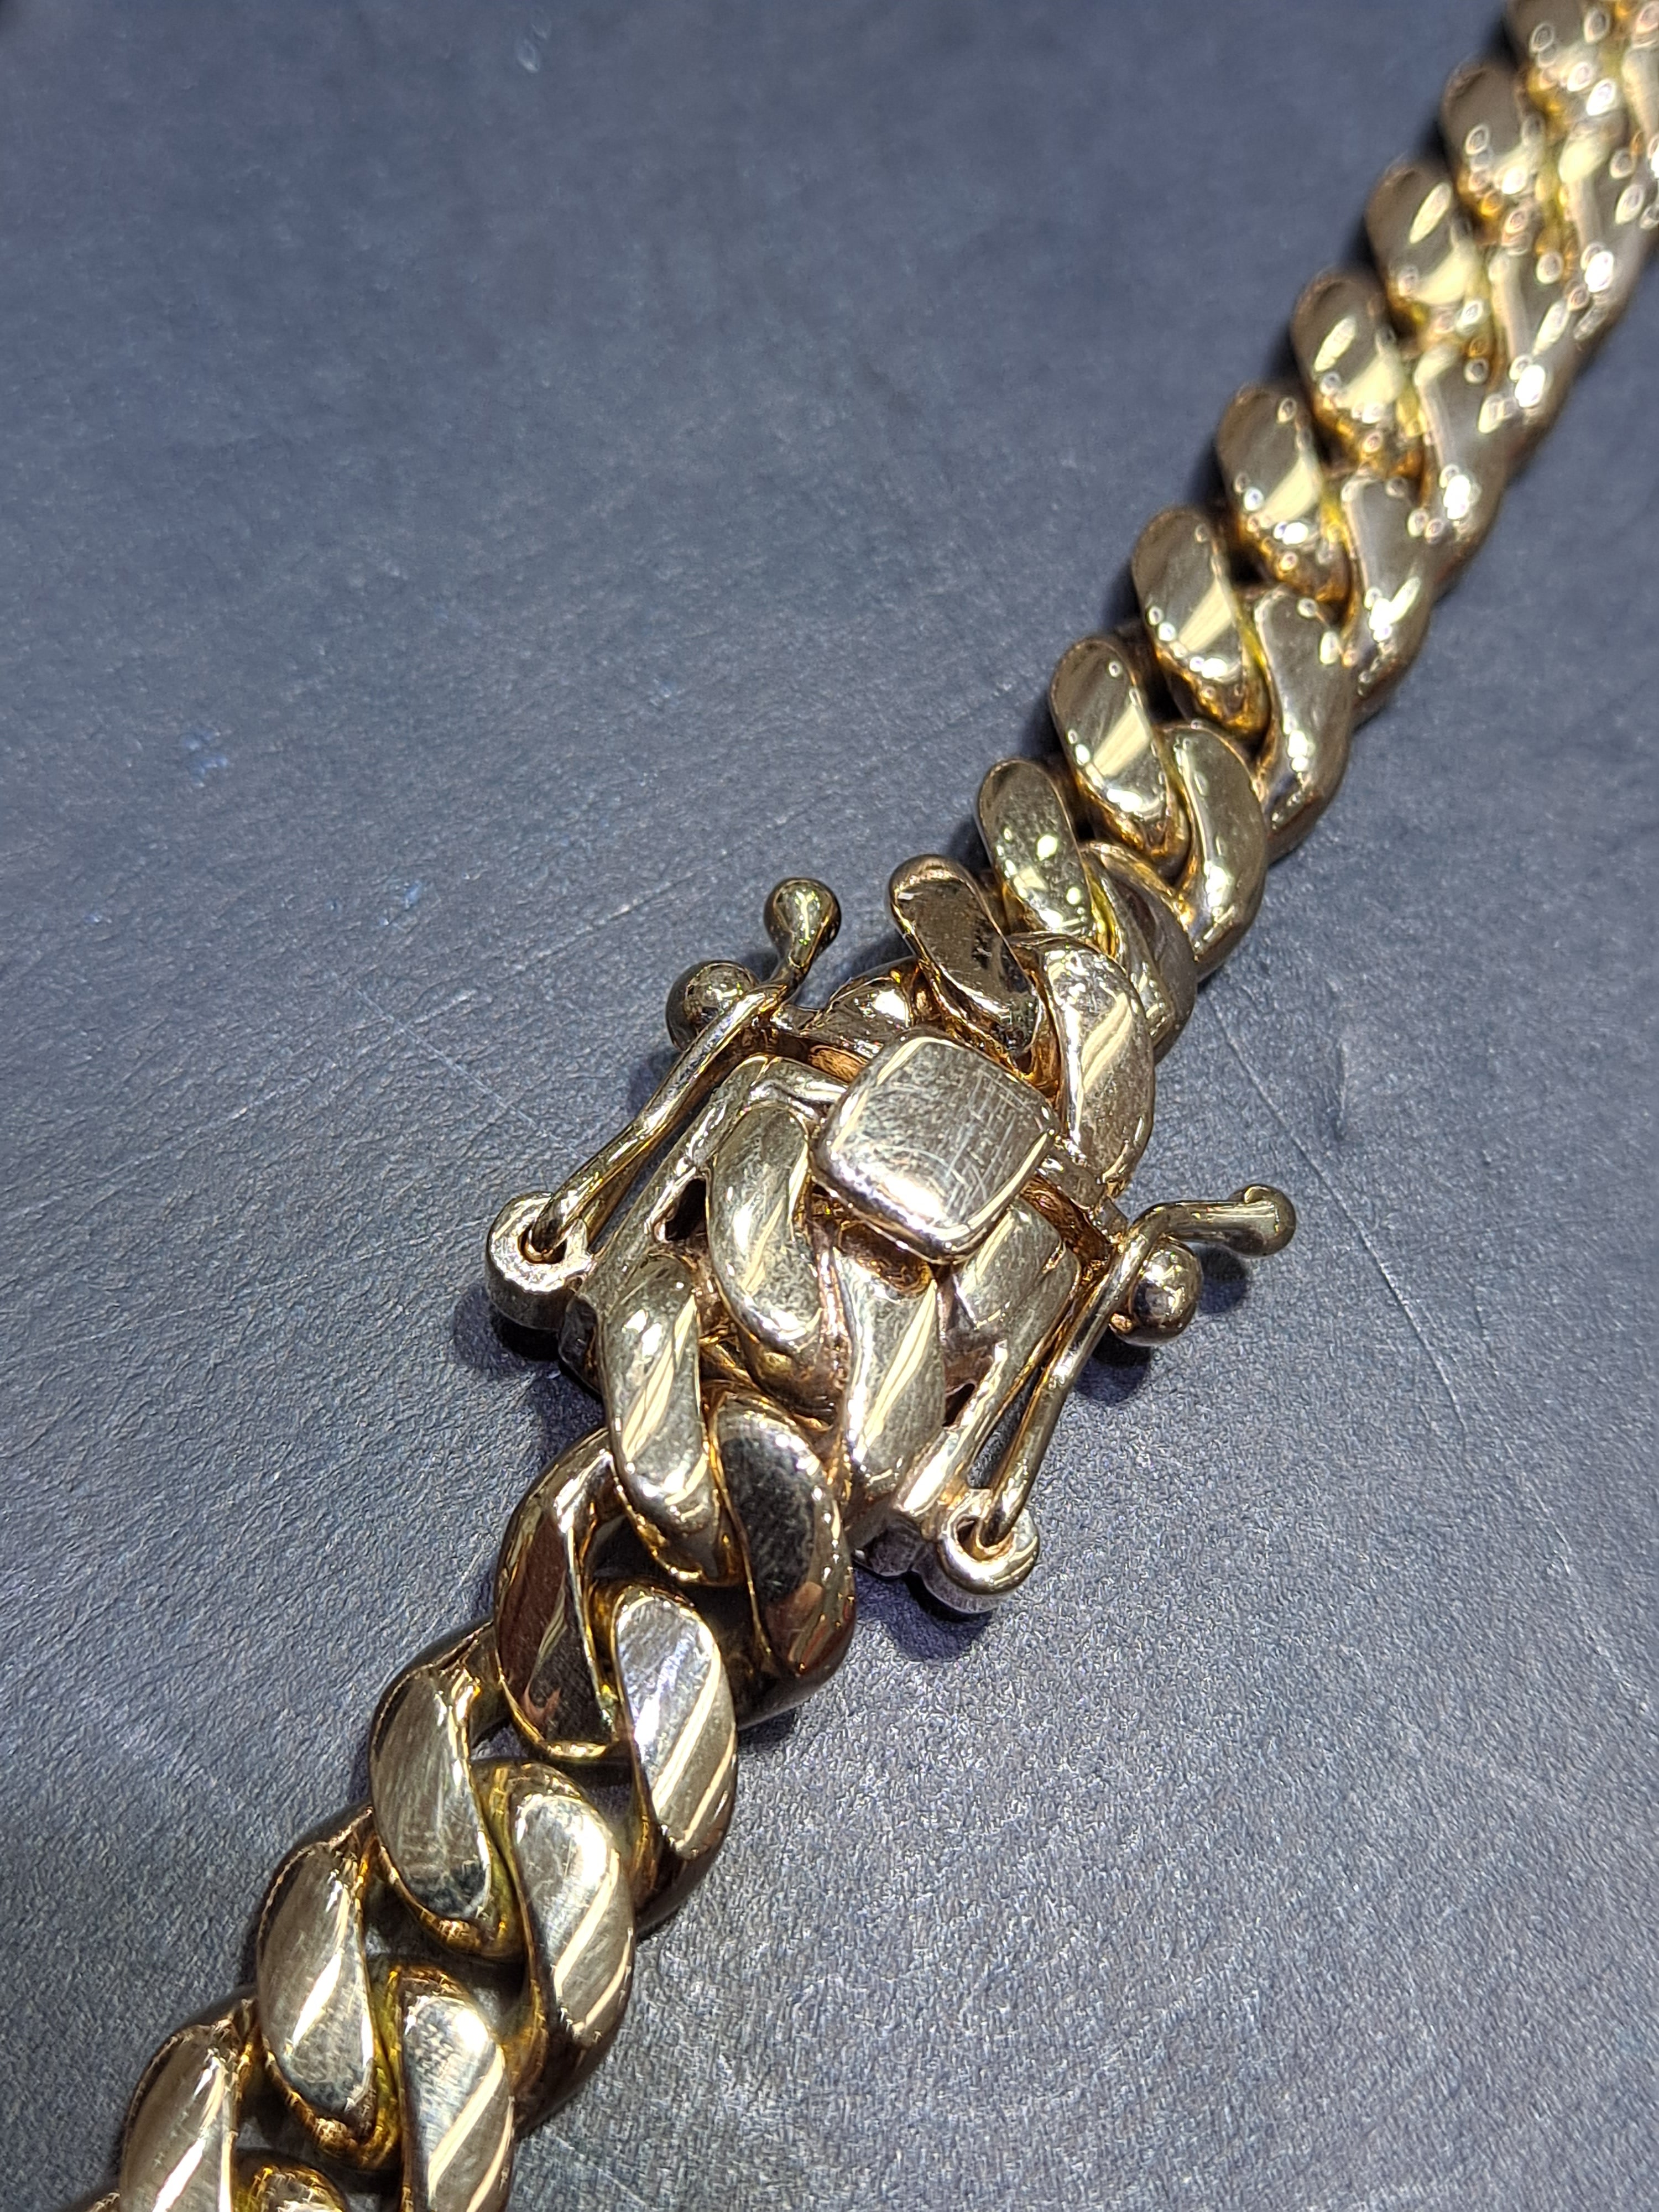 new handmade solid miami cuban link chain 10mm,154 grams,24inches best price online